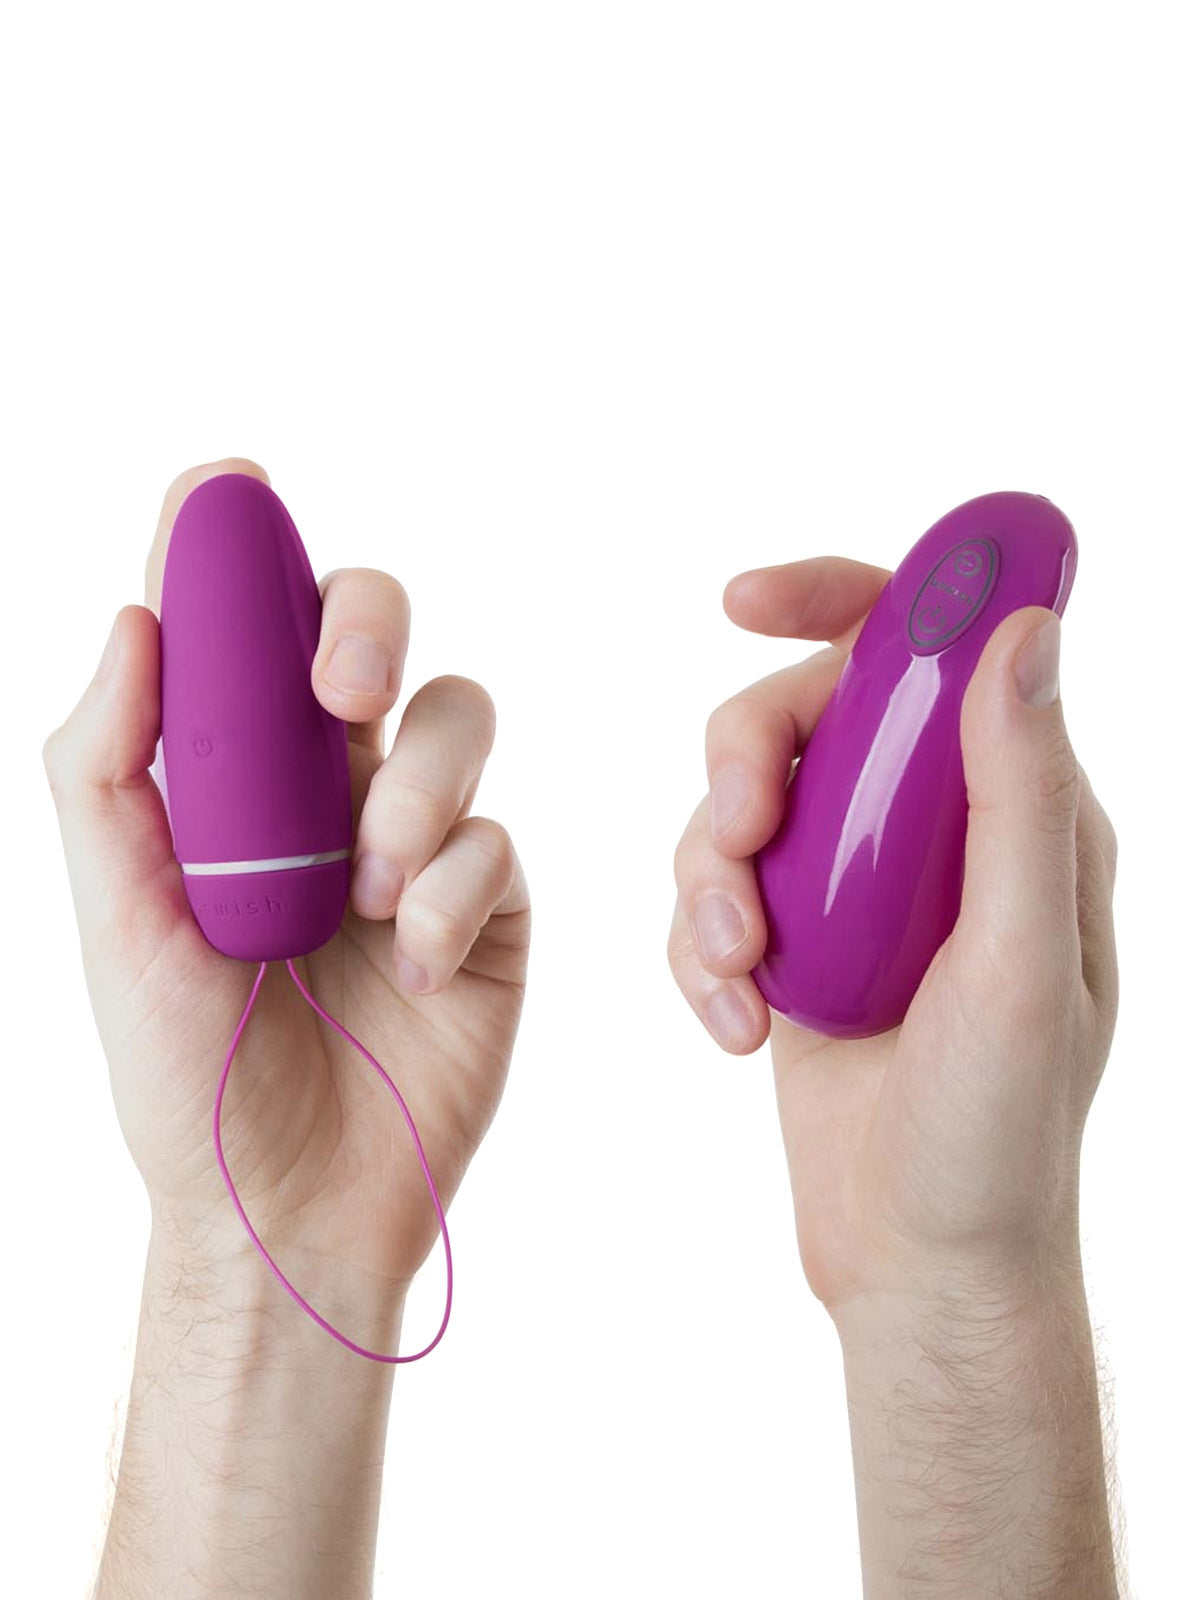 Bnaughty Deluxe Unleashed Egg Vibrator